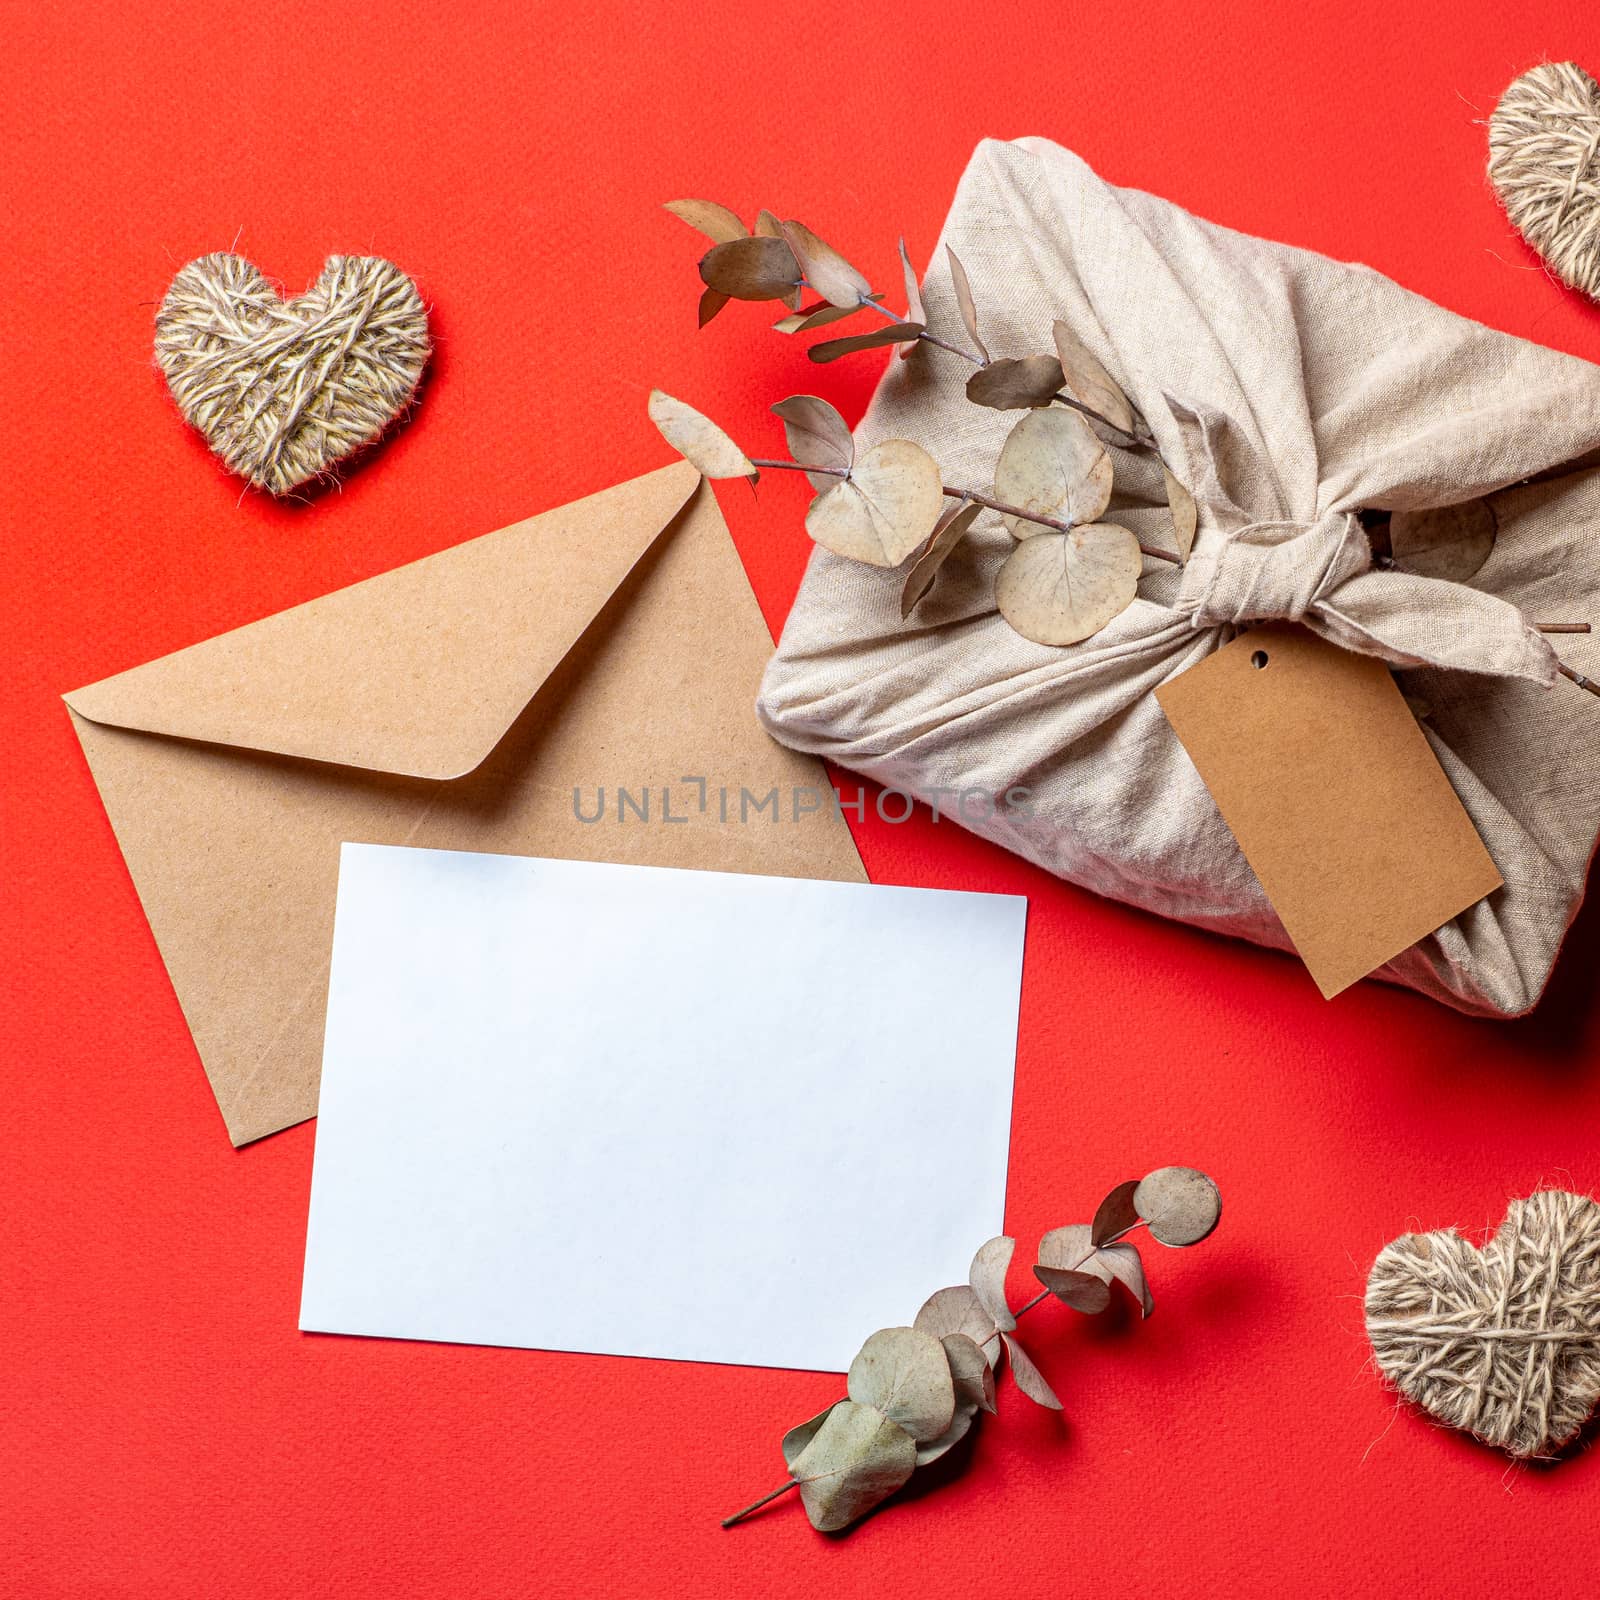 Zero waste Valentine's Day concept and mock up on red. Eco-friendly gift cloth wrapping in Furoshiki style, craft paper envelope,empty greetings card. Top down view or flat lay. Copy space for design